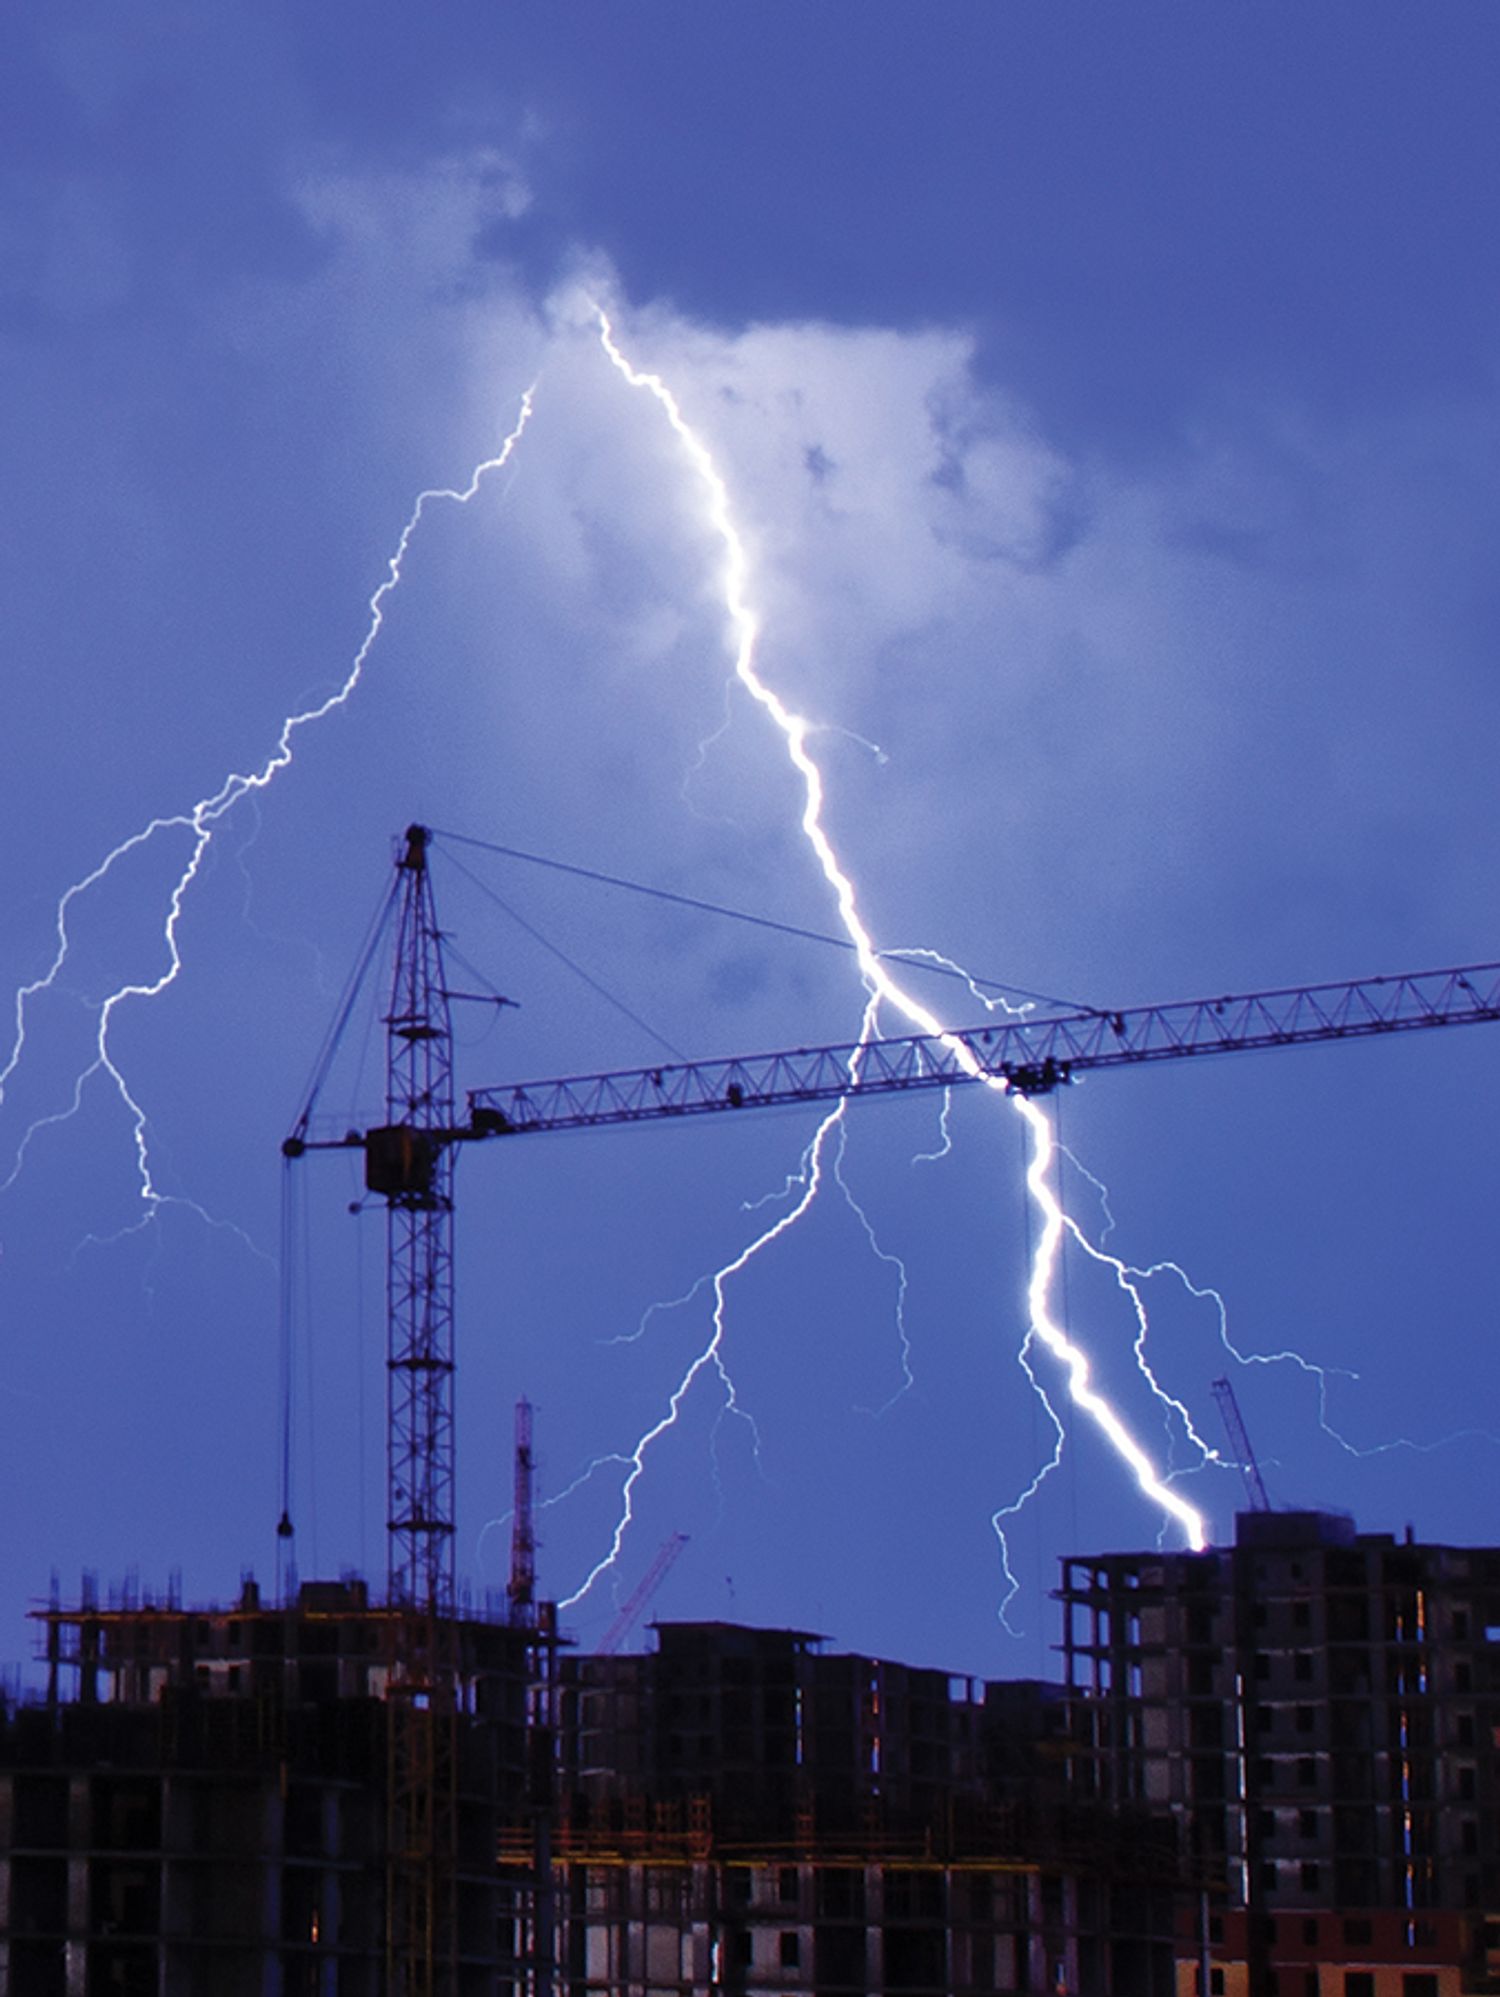 Protecting your workers from lightning strikes